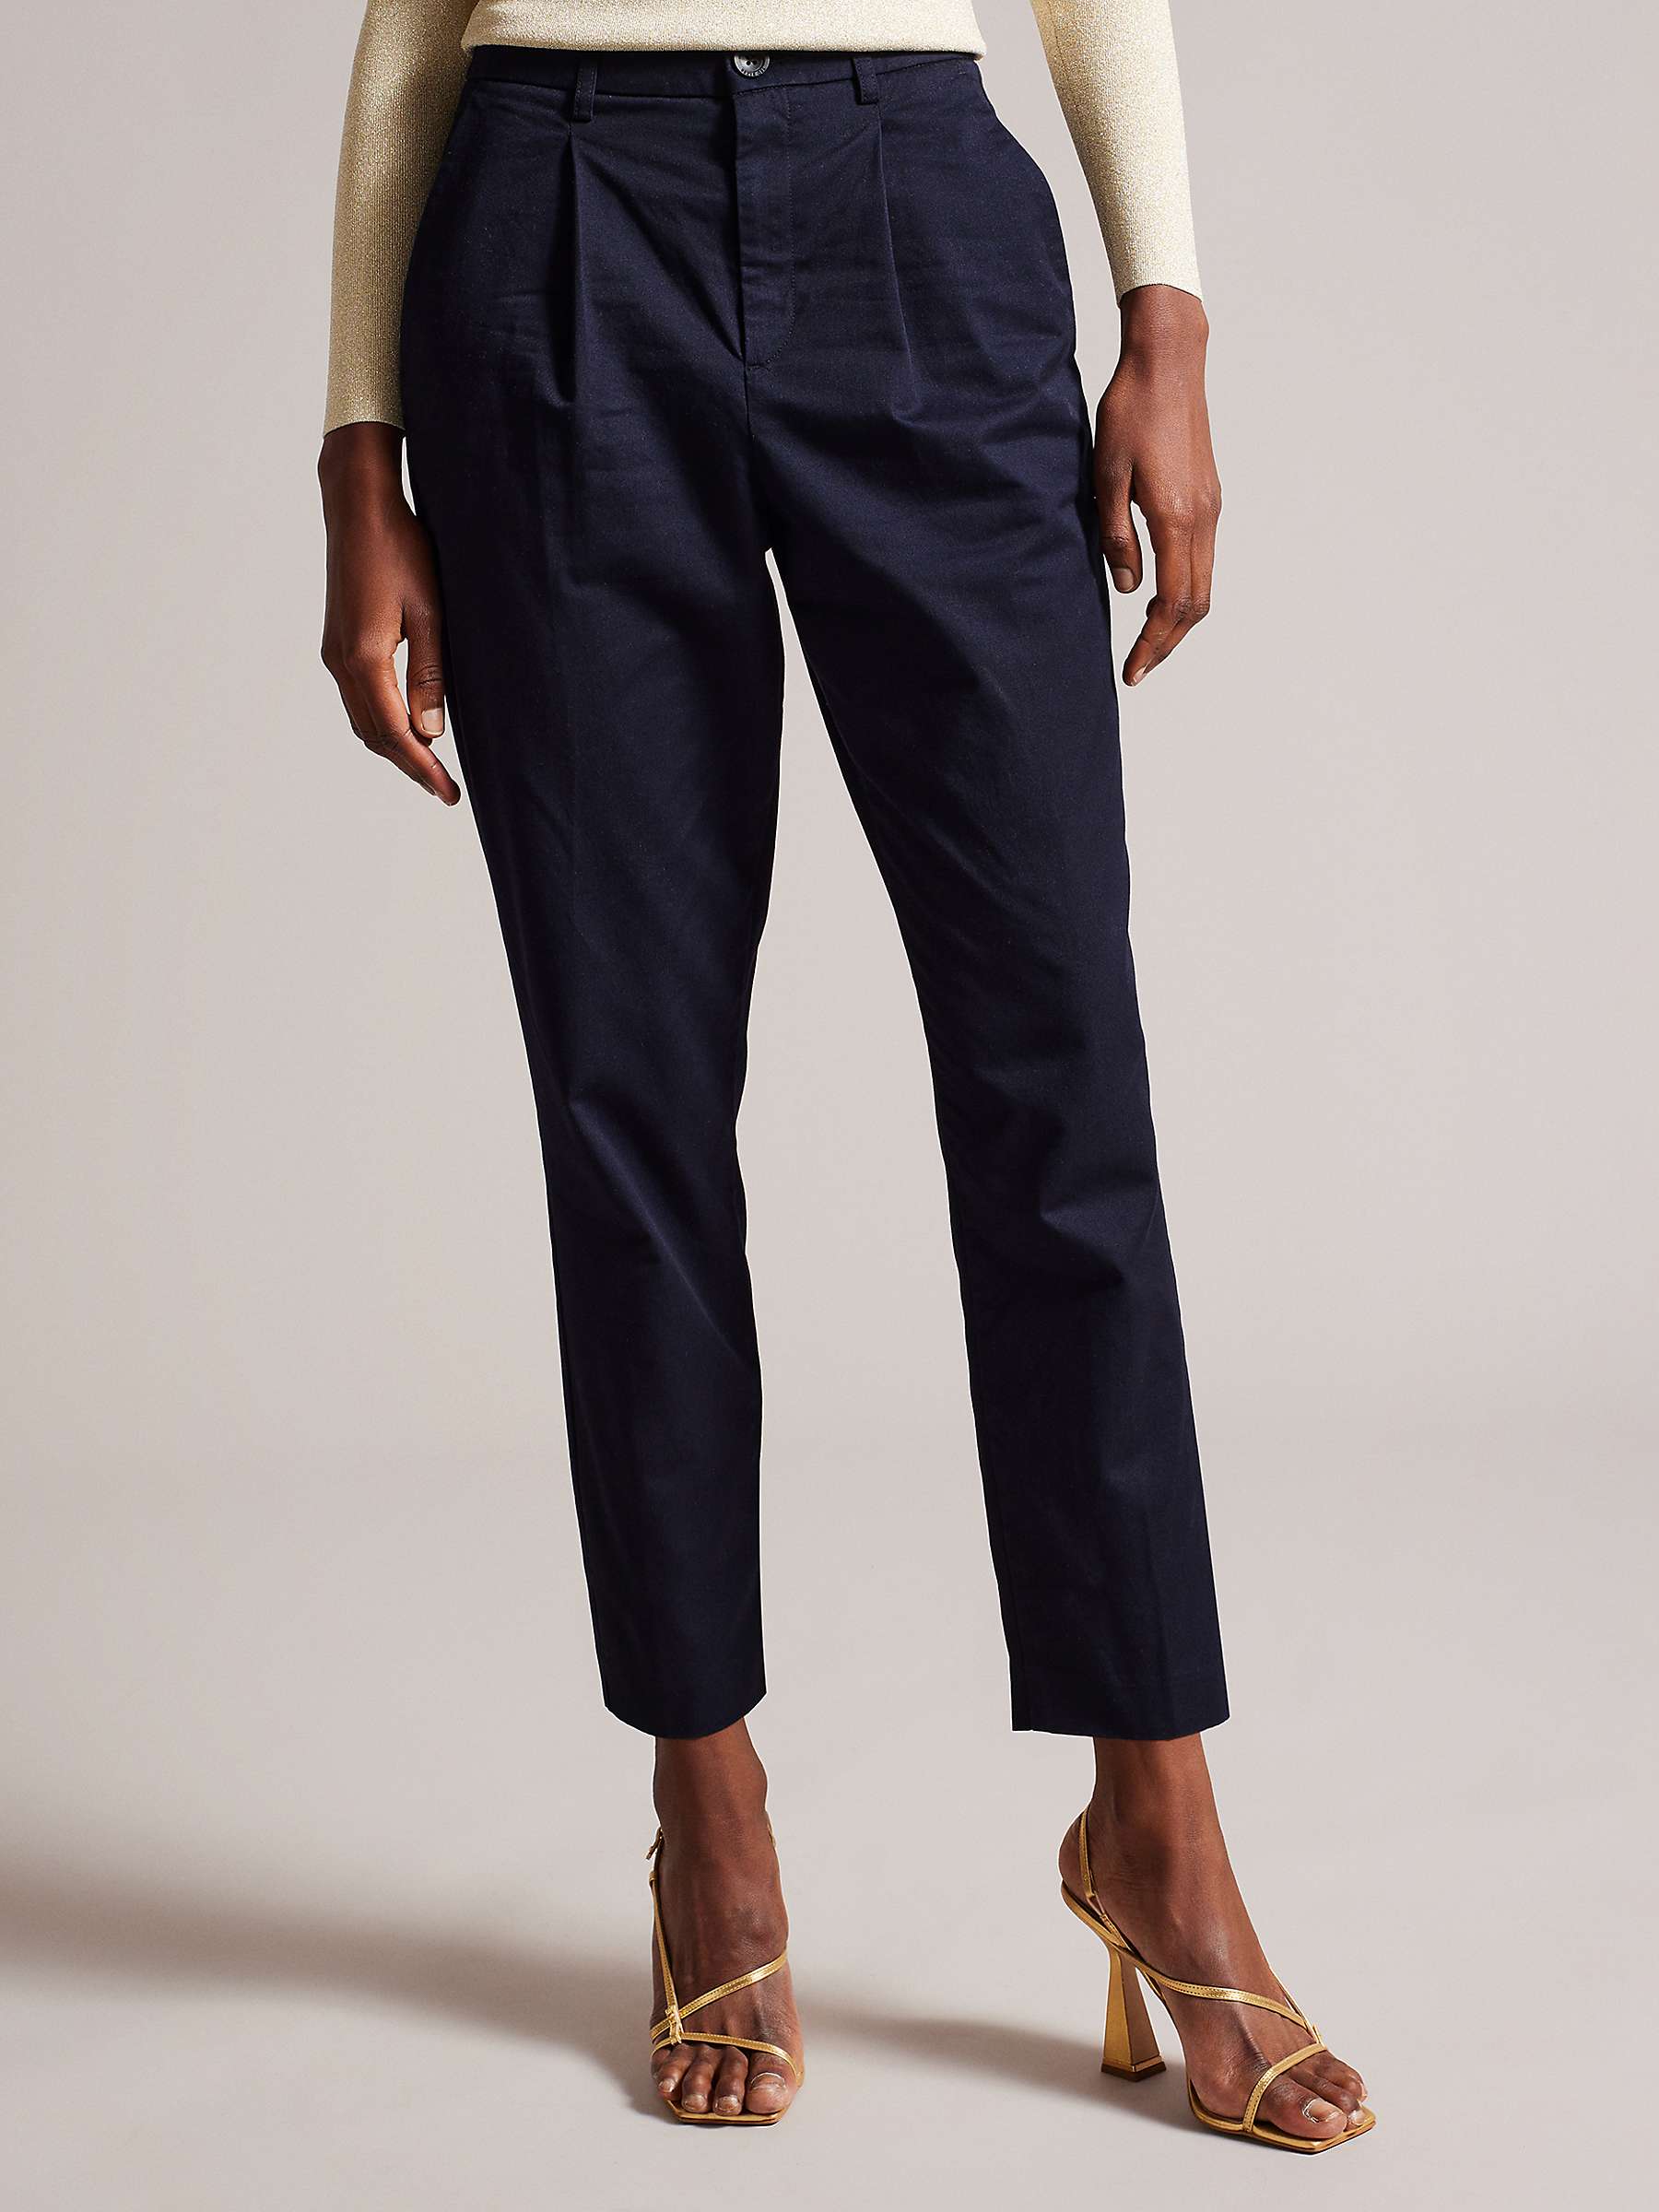 Buy Ted Baker Maryiah High Waisted Trousers Online at johnlewis.com